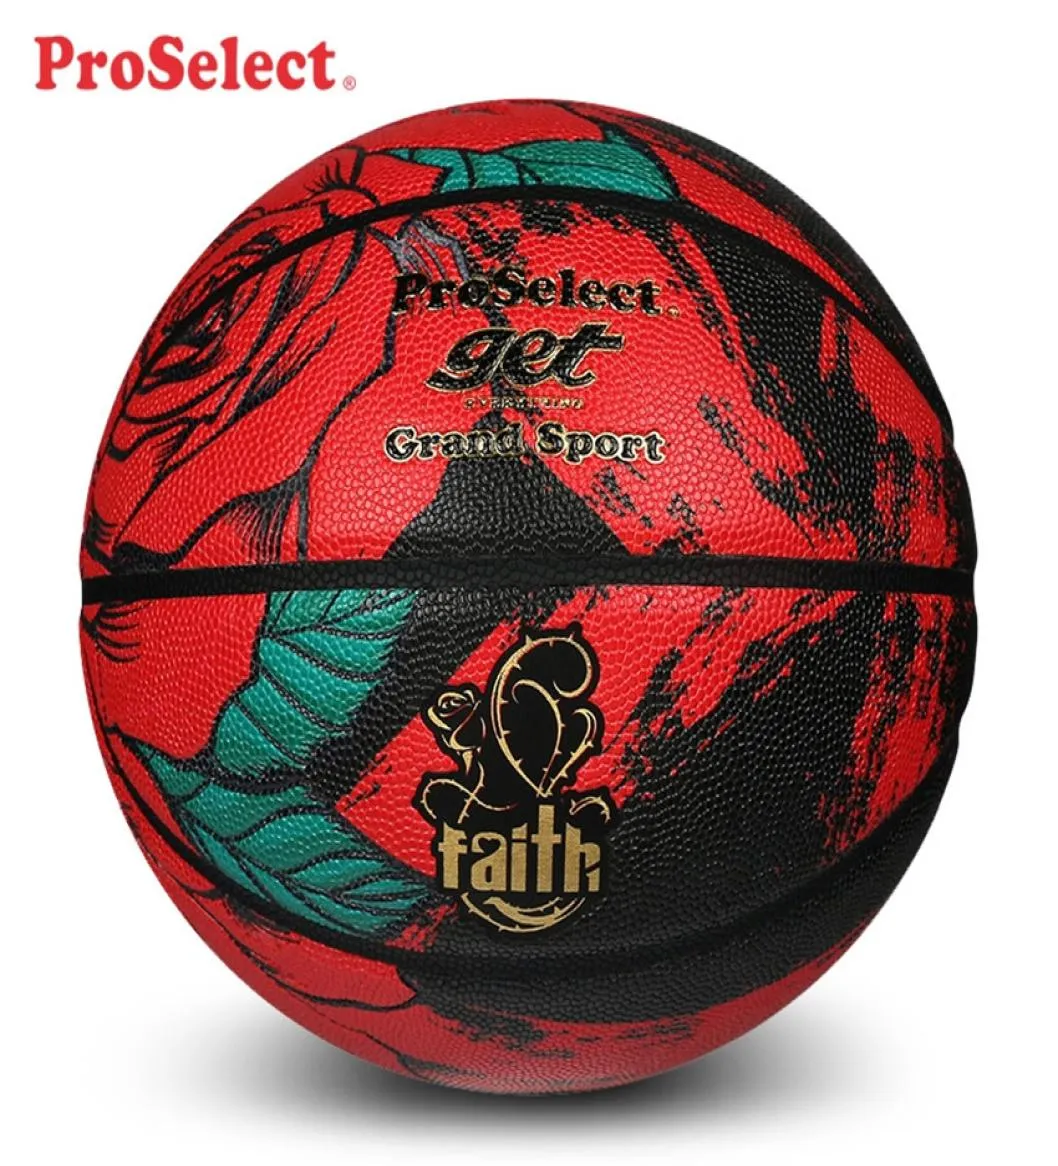 SPALDING wilson Proselect basketball ball Official authentic glory rose Classic edition indoor outdoor universal antislip wearre4371016